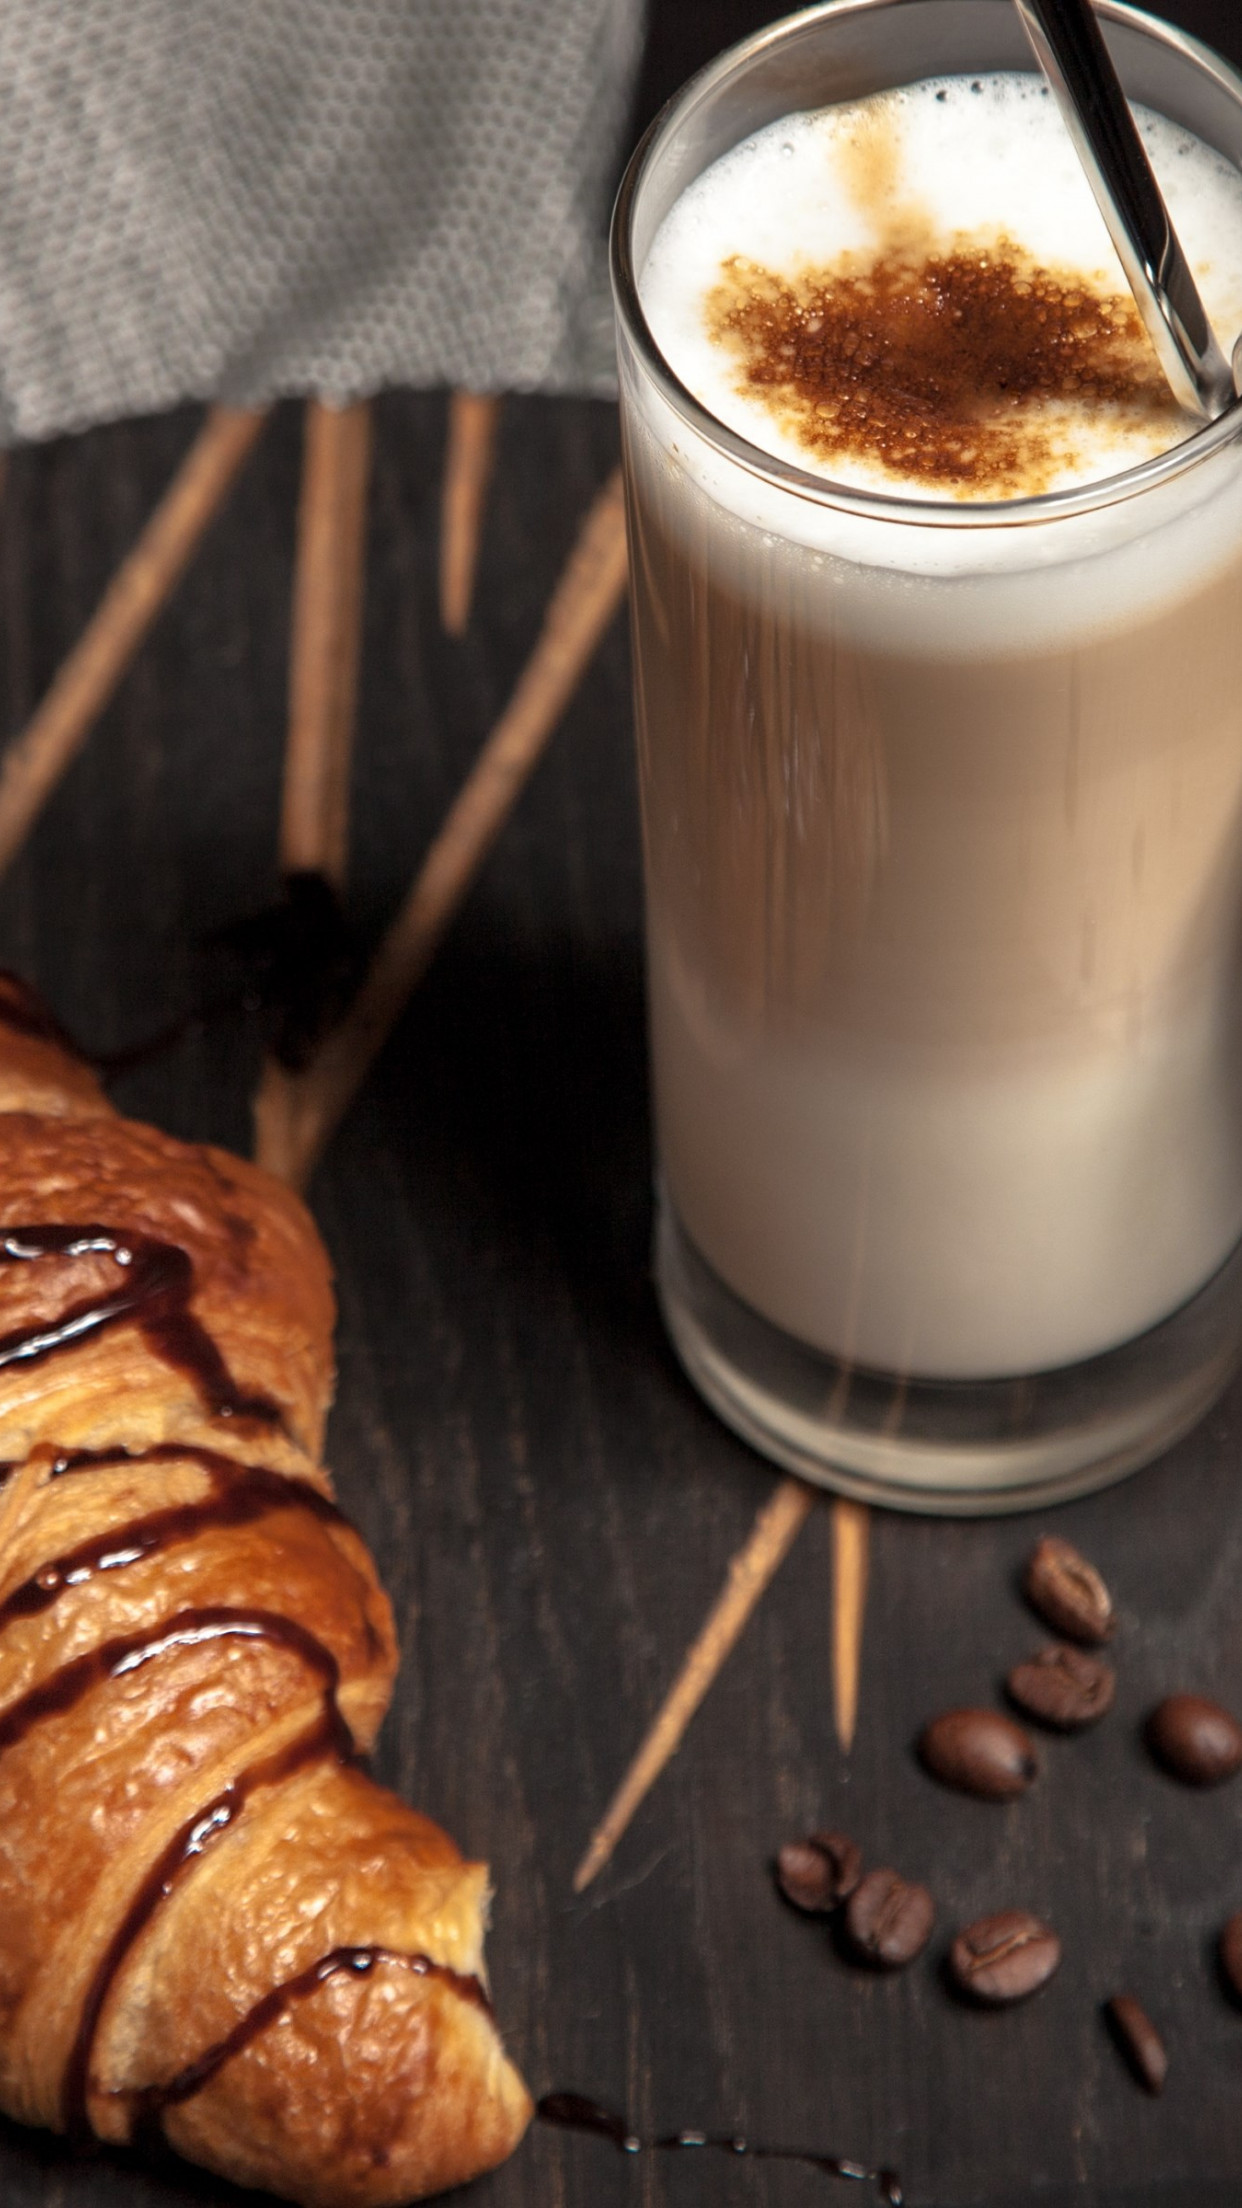 Cappuccino and chocolate croissant wallpaper 1242x2208